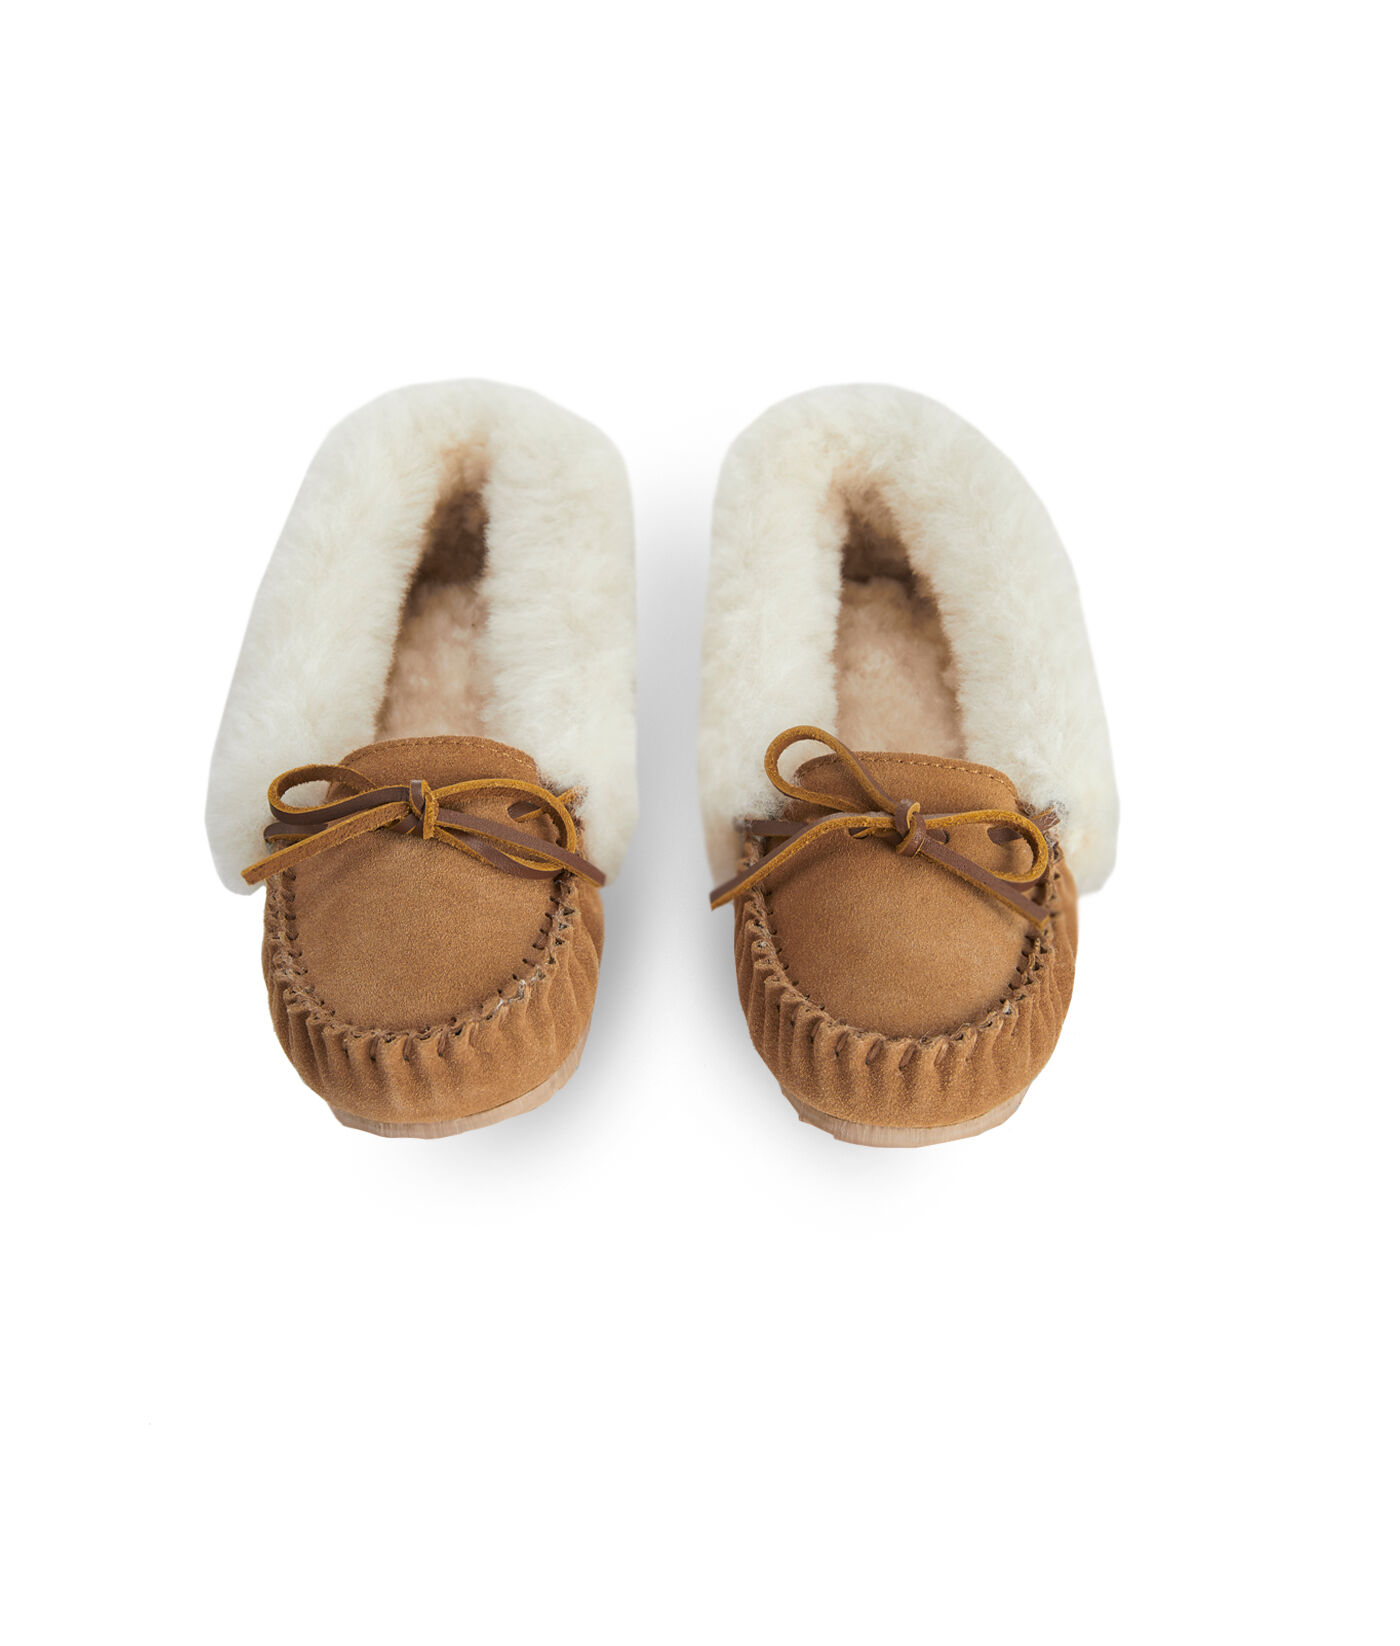 Shop Womens Suede Shearling Slippers at 